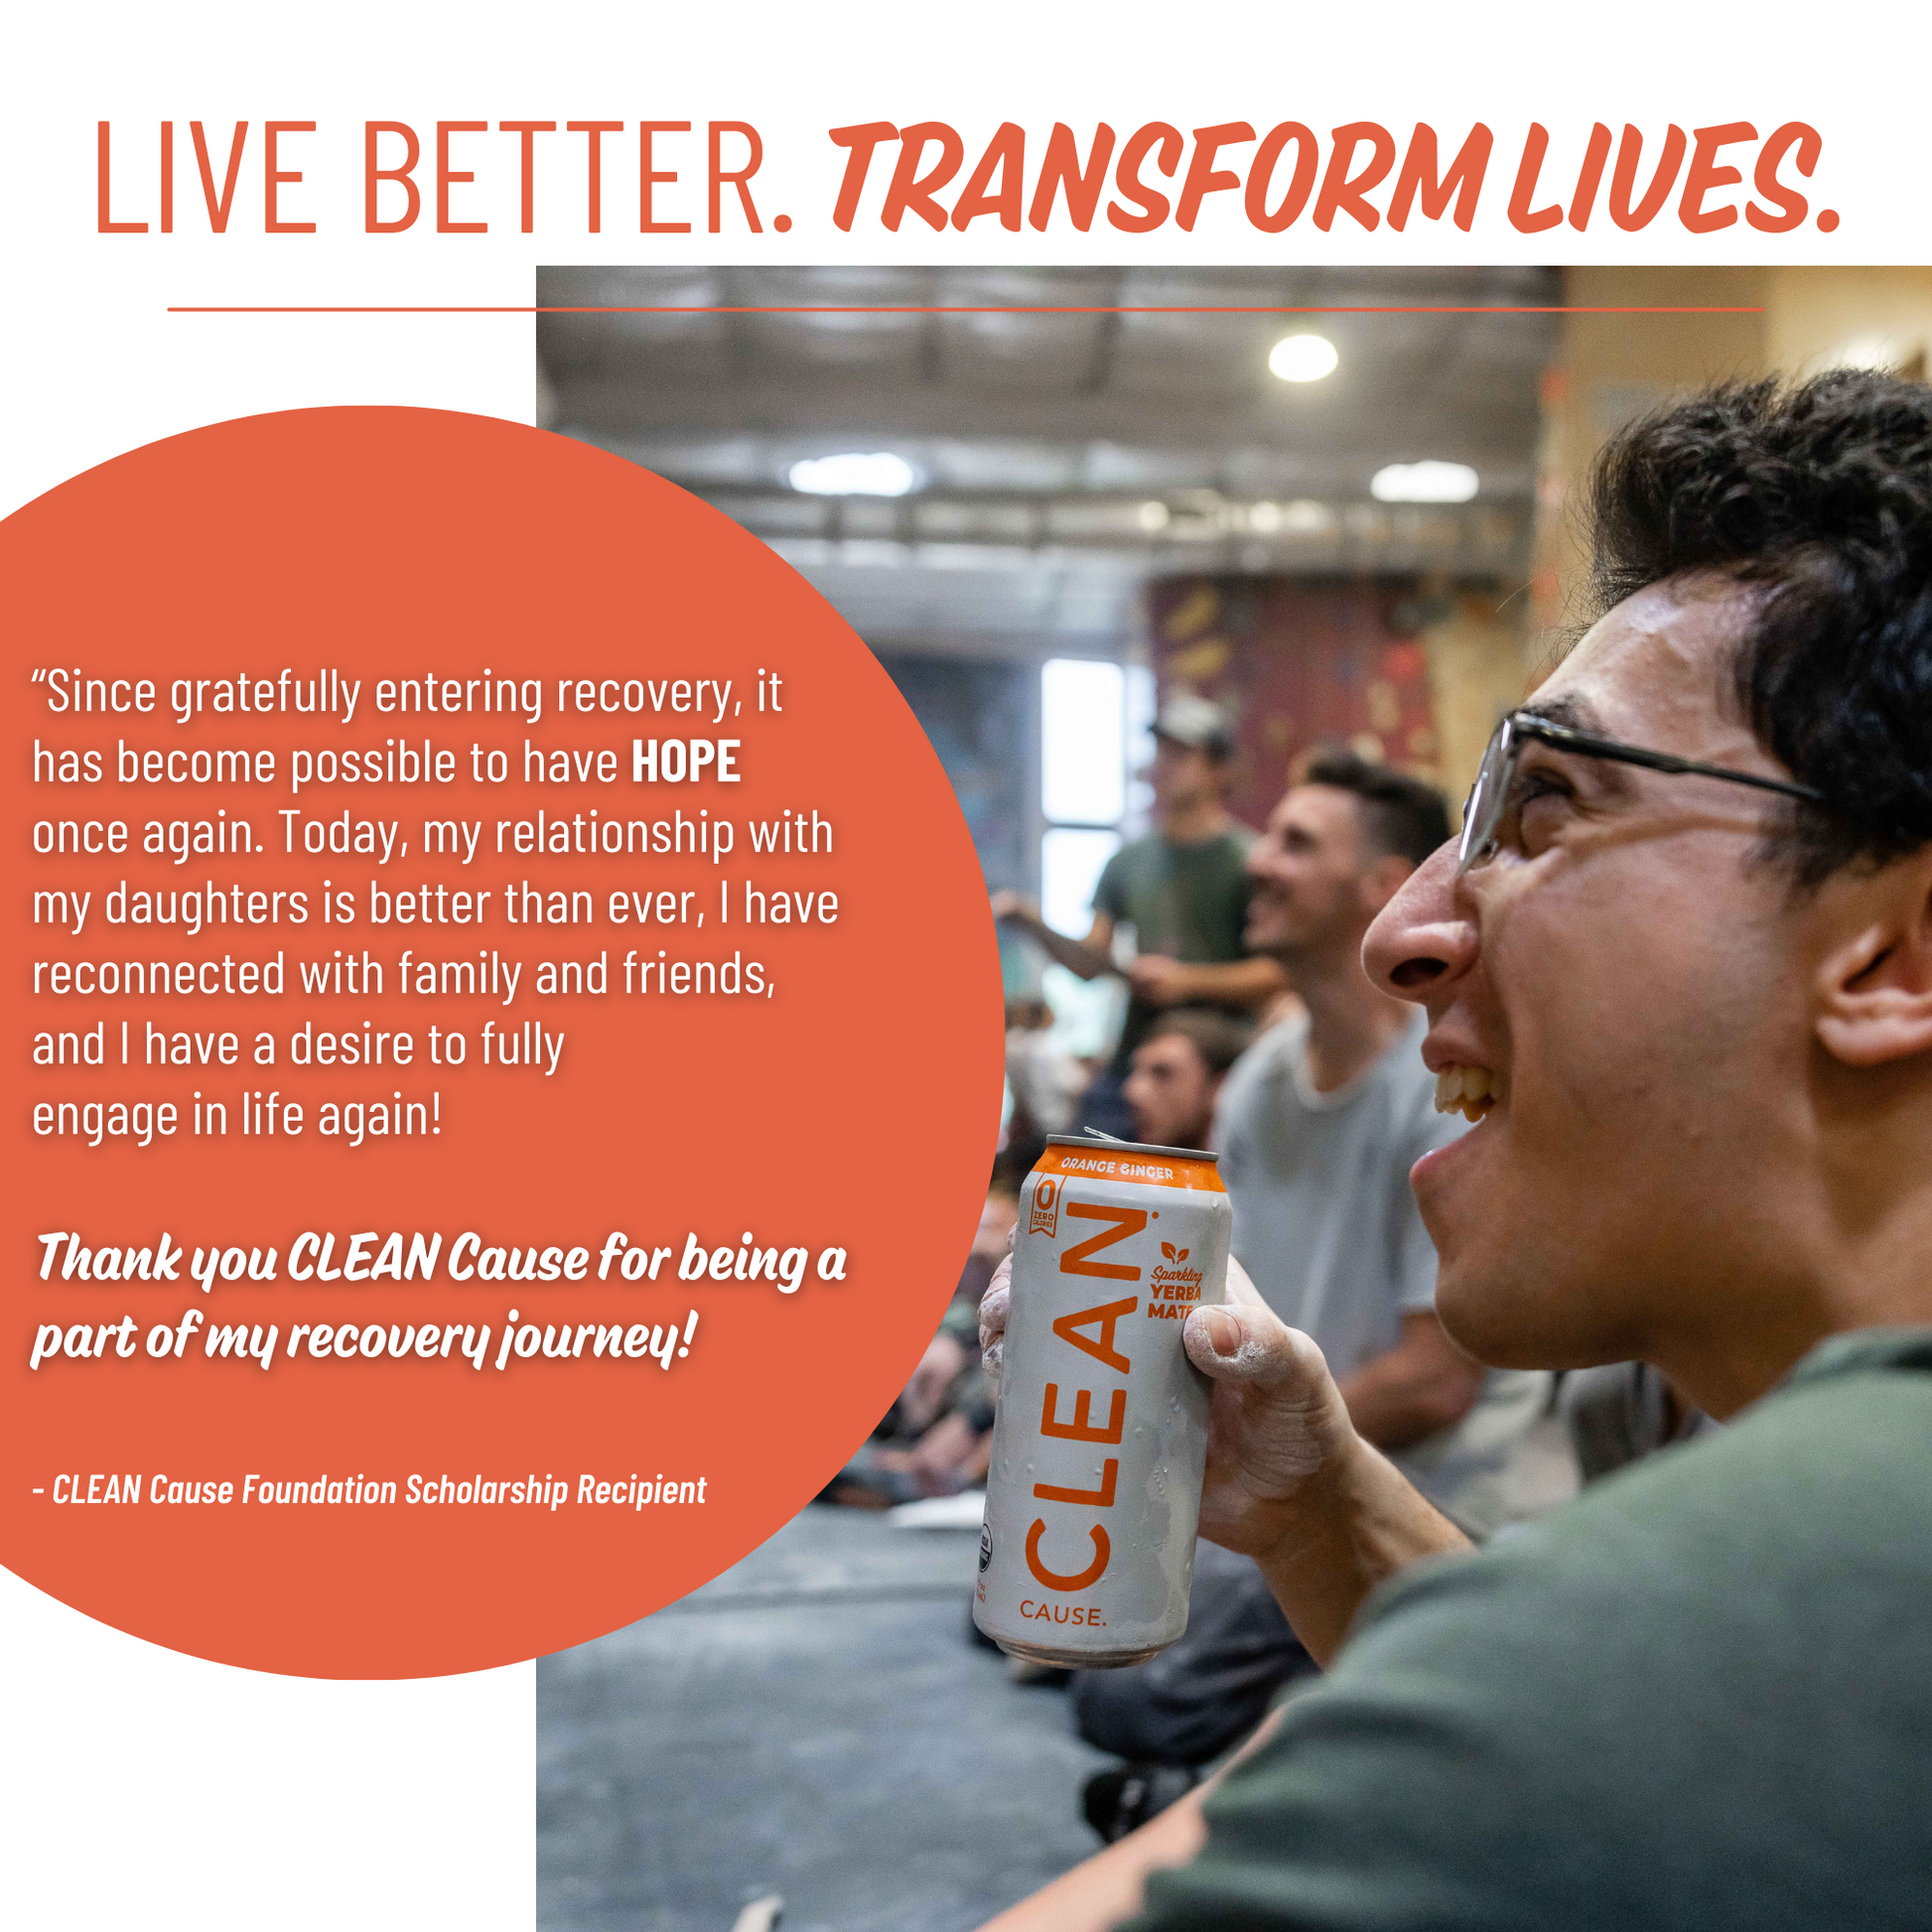 A picture of a man sitting in a rock climbing gym holding an Orange Ginger CLEAN with the slogan Live Better. Transform Lives. above it and a scholarship recipient story to the left